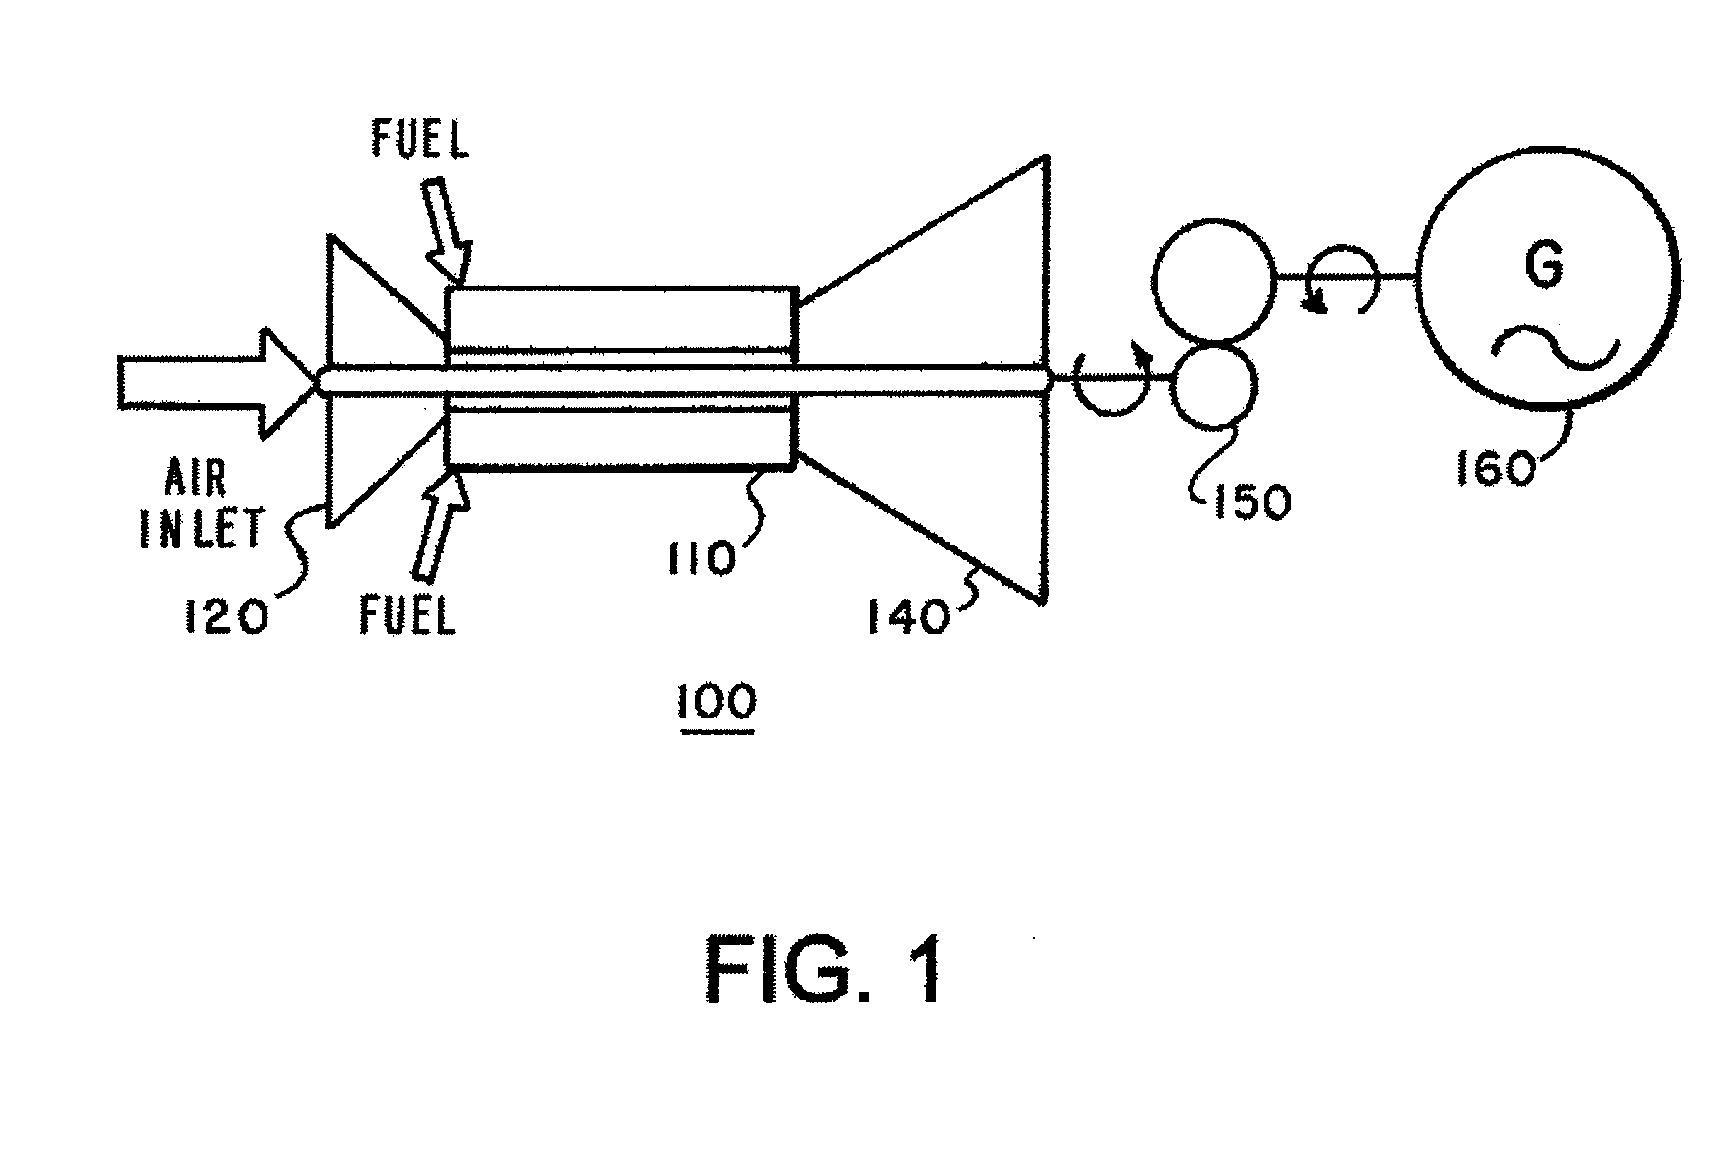 System and Method for Power Production Using a Hybrid Helical Detonation Device